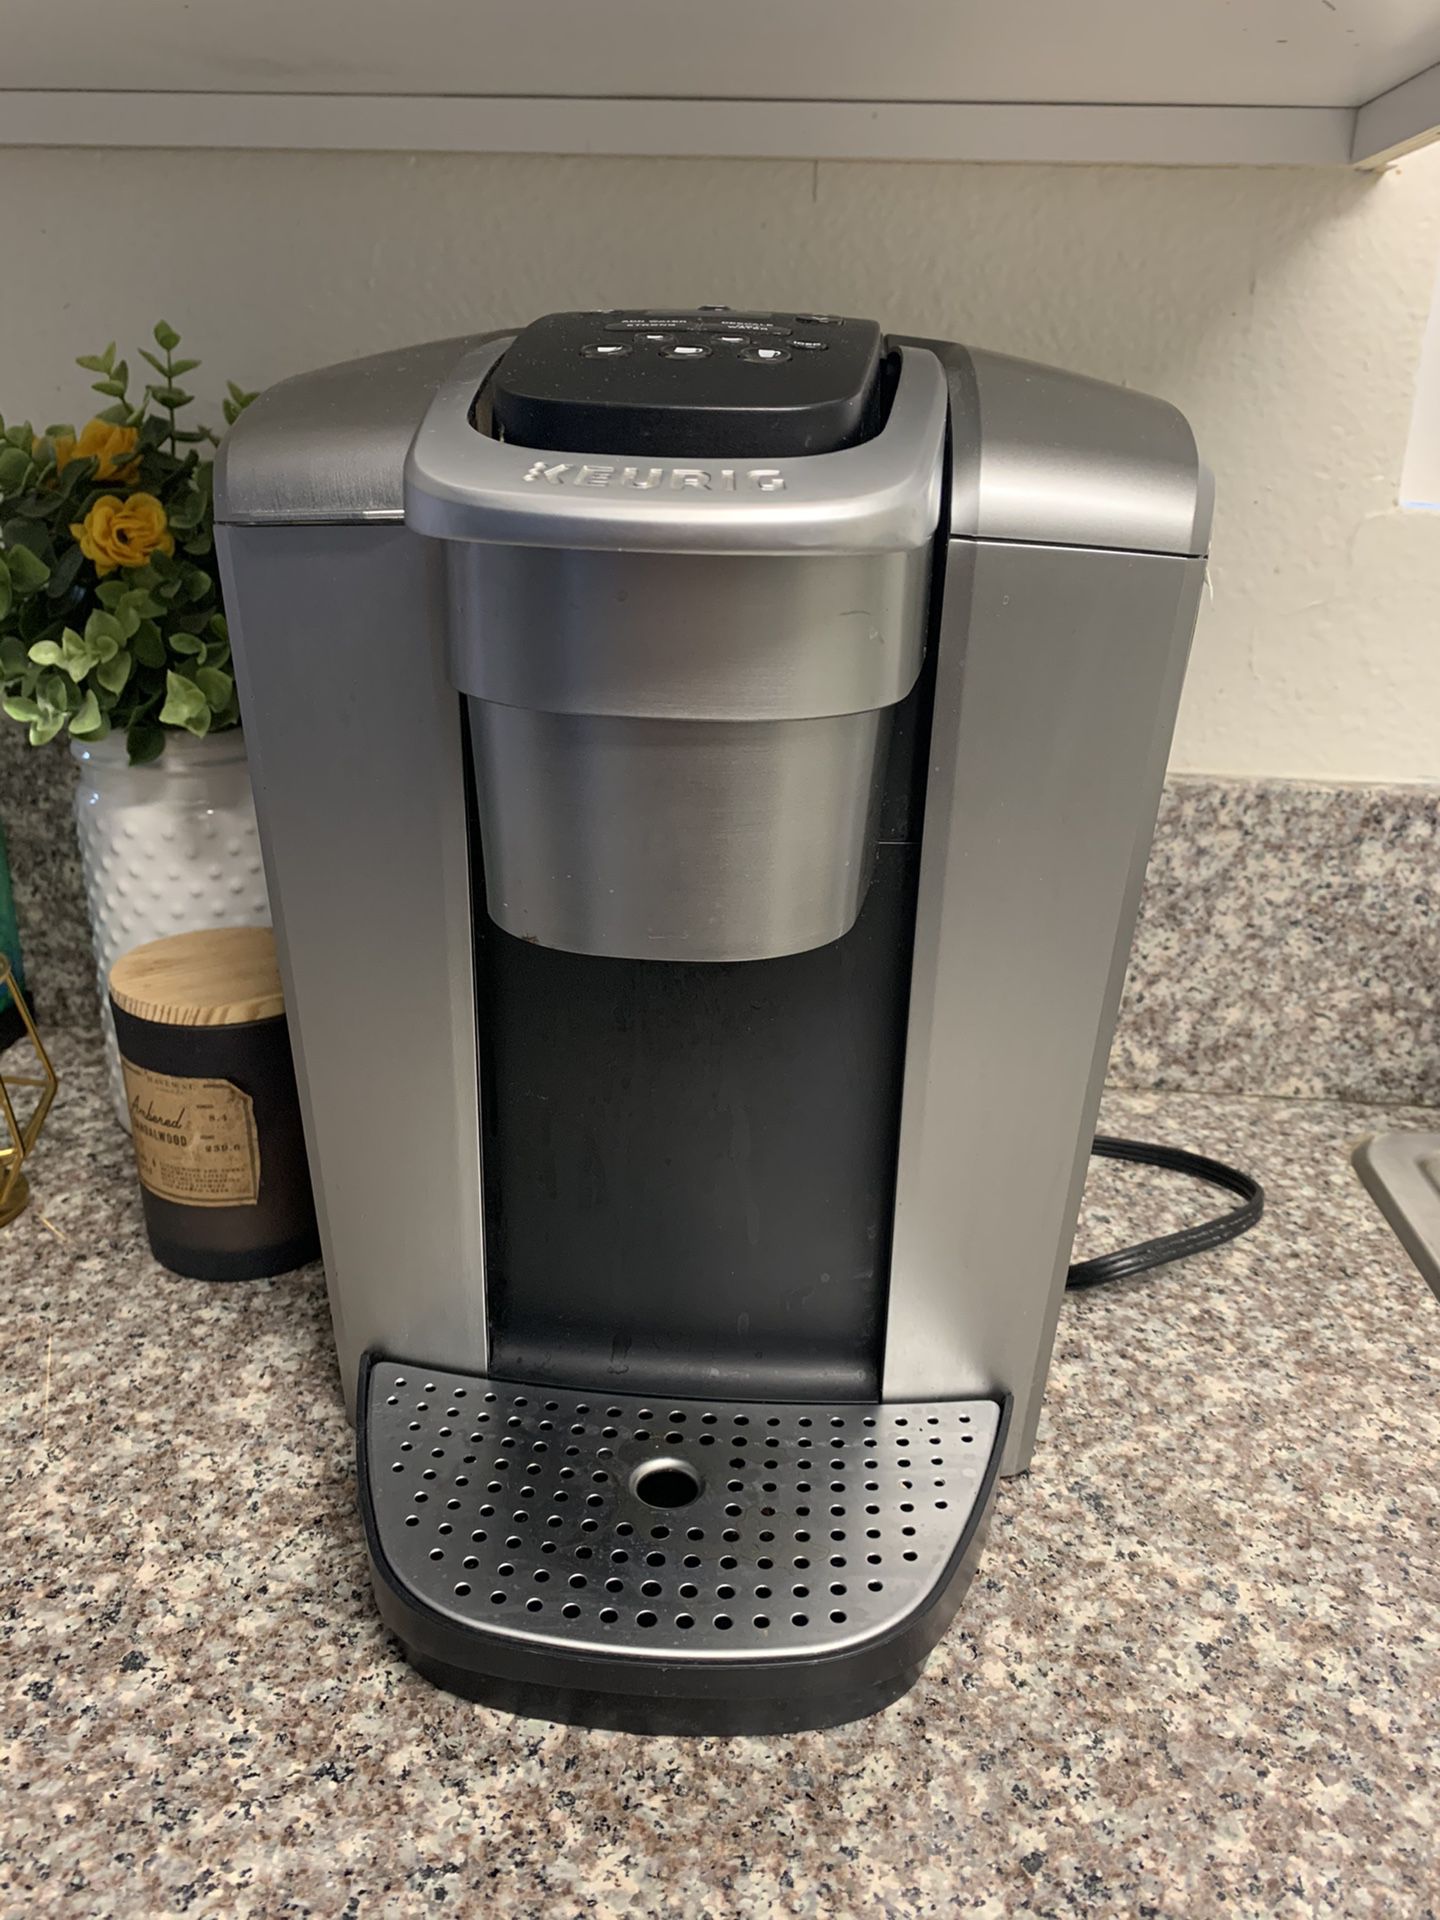 Like New Yellow DeLonghi KMix 5-Cup Coffee Maker for Sale in Chicago, IL -  OfferUp